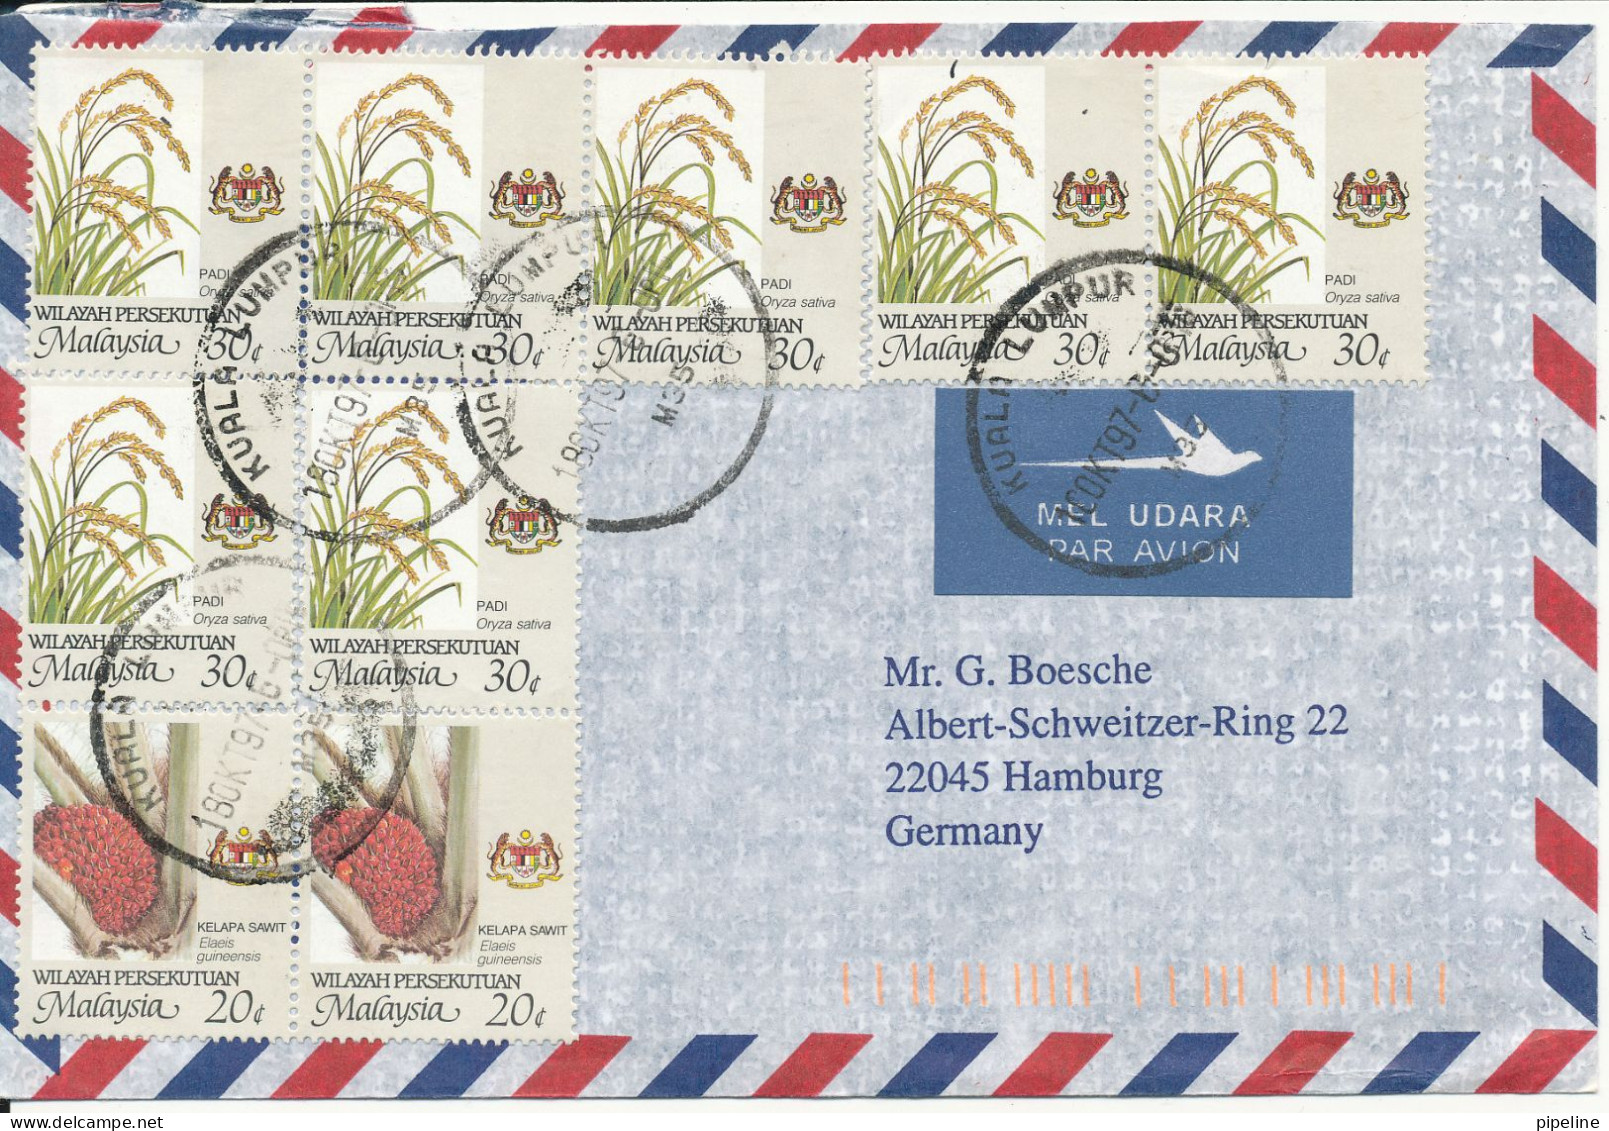 Malaysia Wilayah Persekutuan Air Mail Cover Sent To Germany 18-10-1997 - Malesia (1964-...)